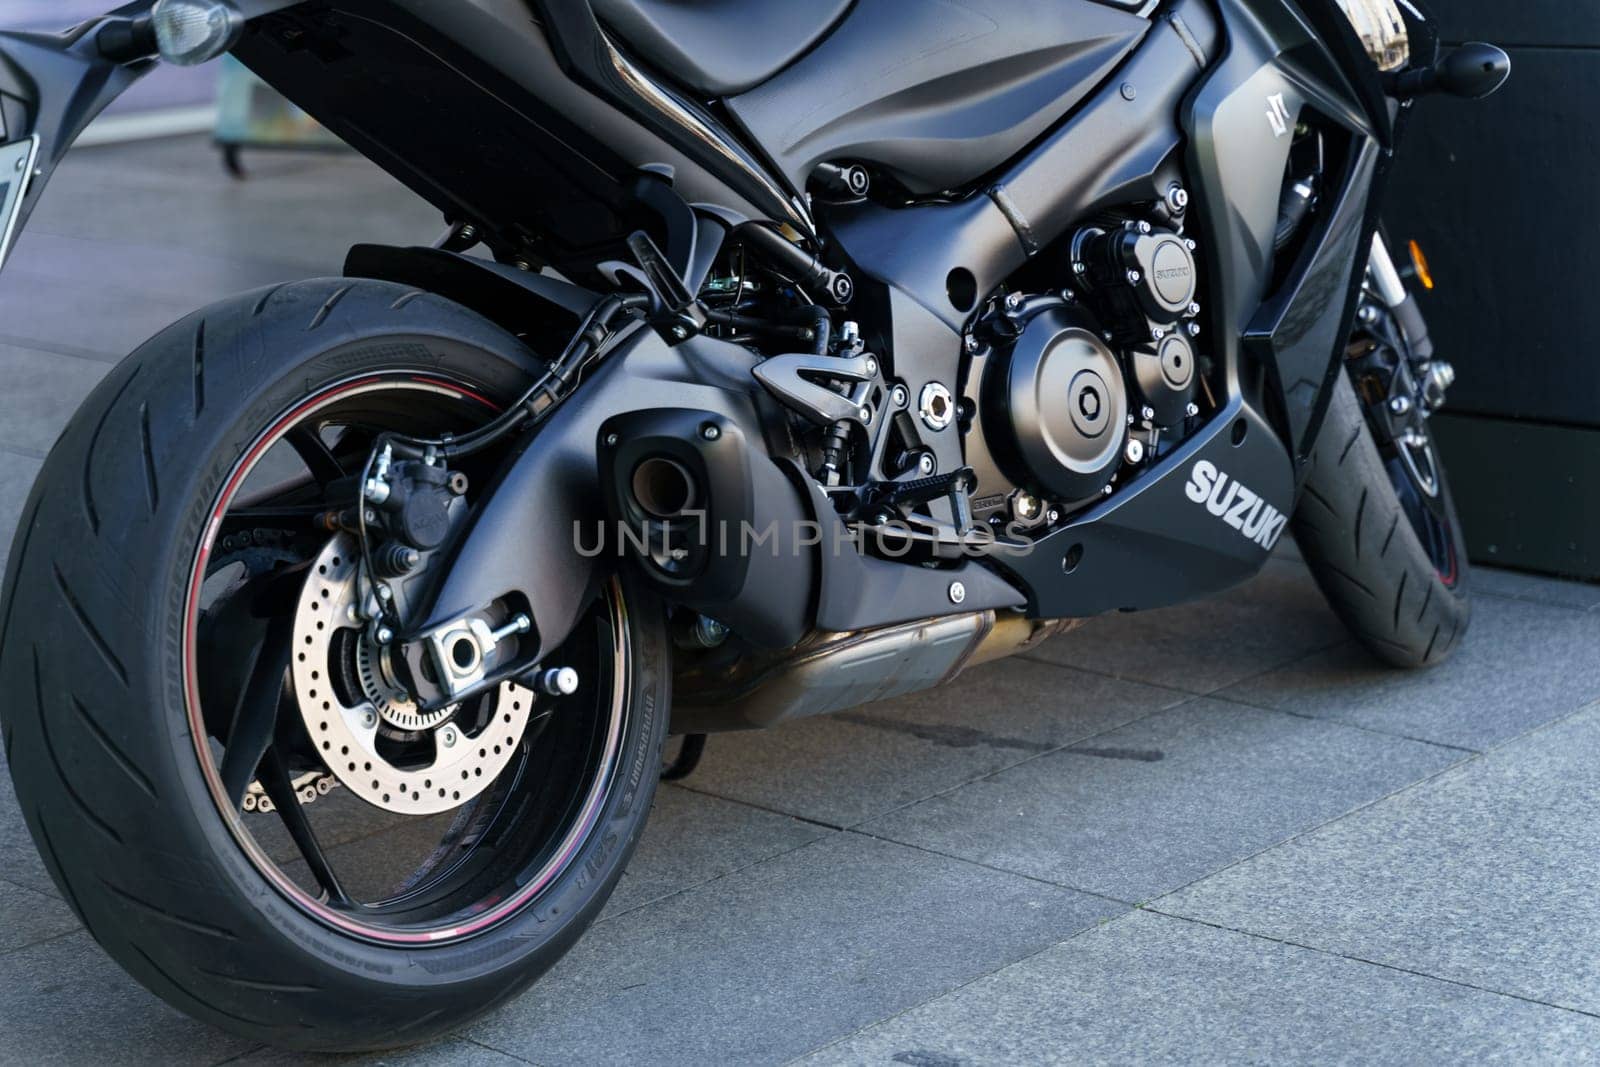 Wroclaw, Poland - August 4, 2023: A black Suzuki GSX motorcycle is parked in front of a building, showcasing its sleek design and powerful presence.